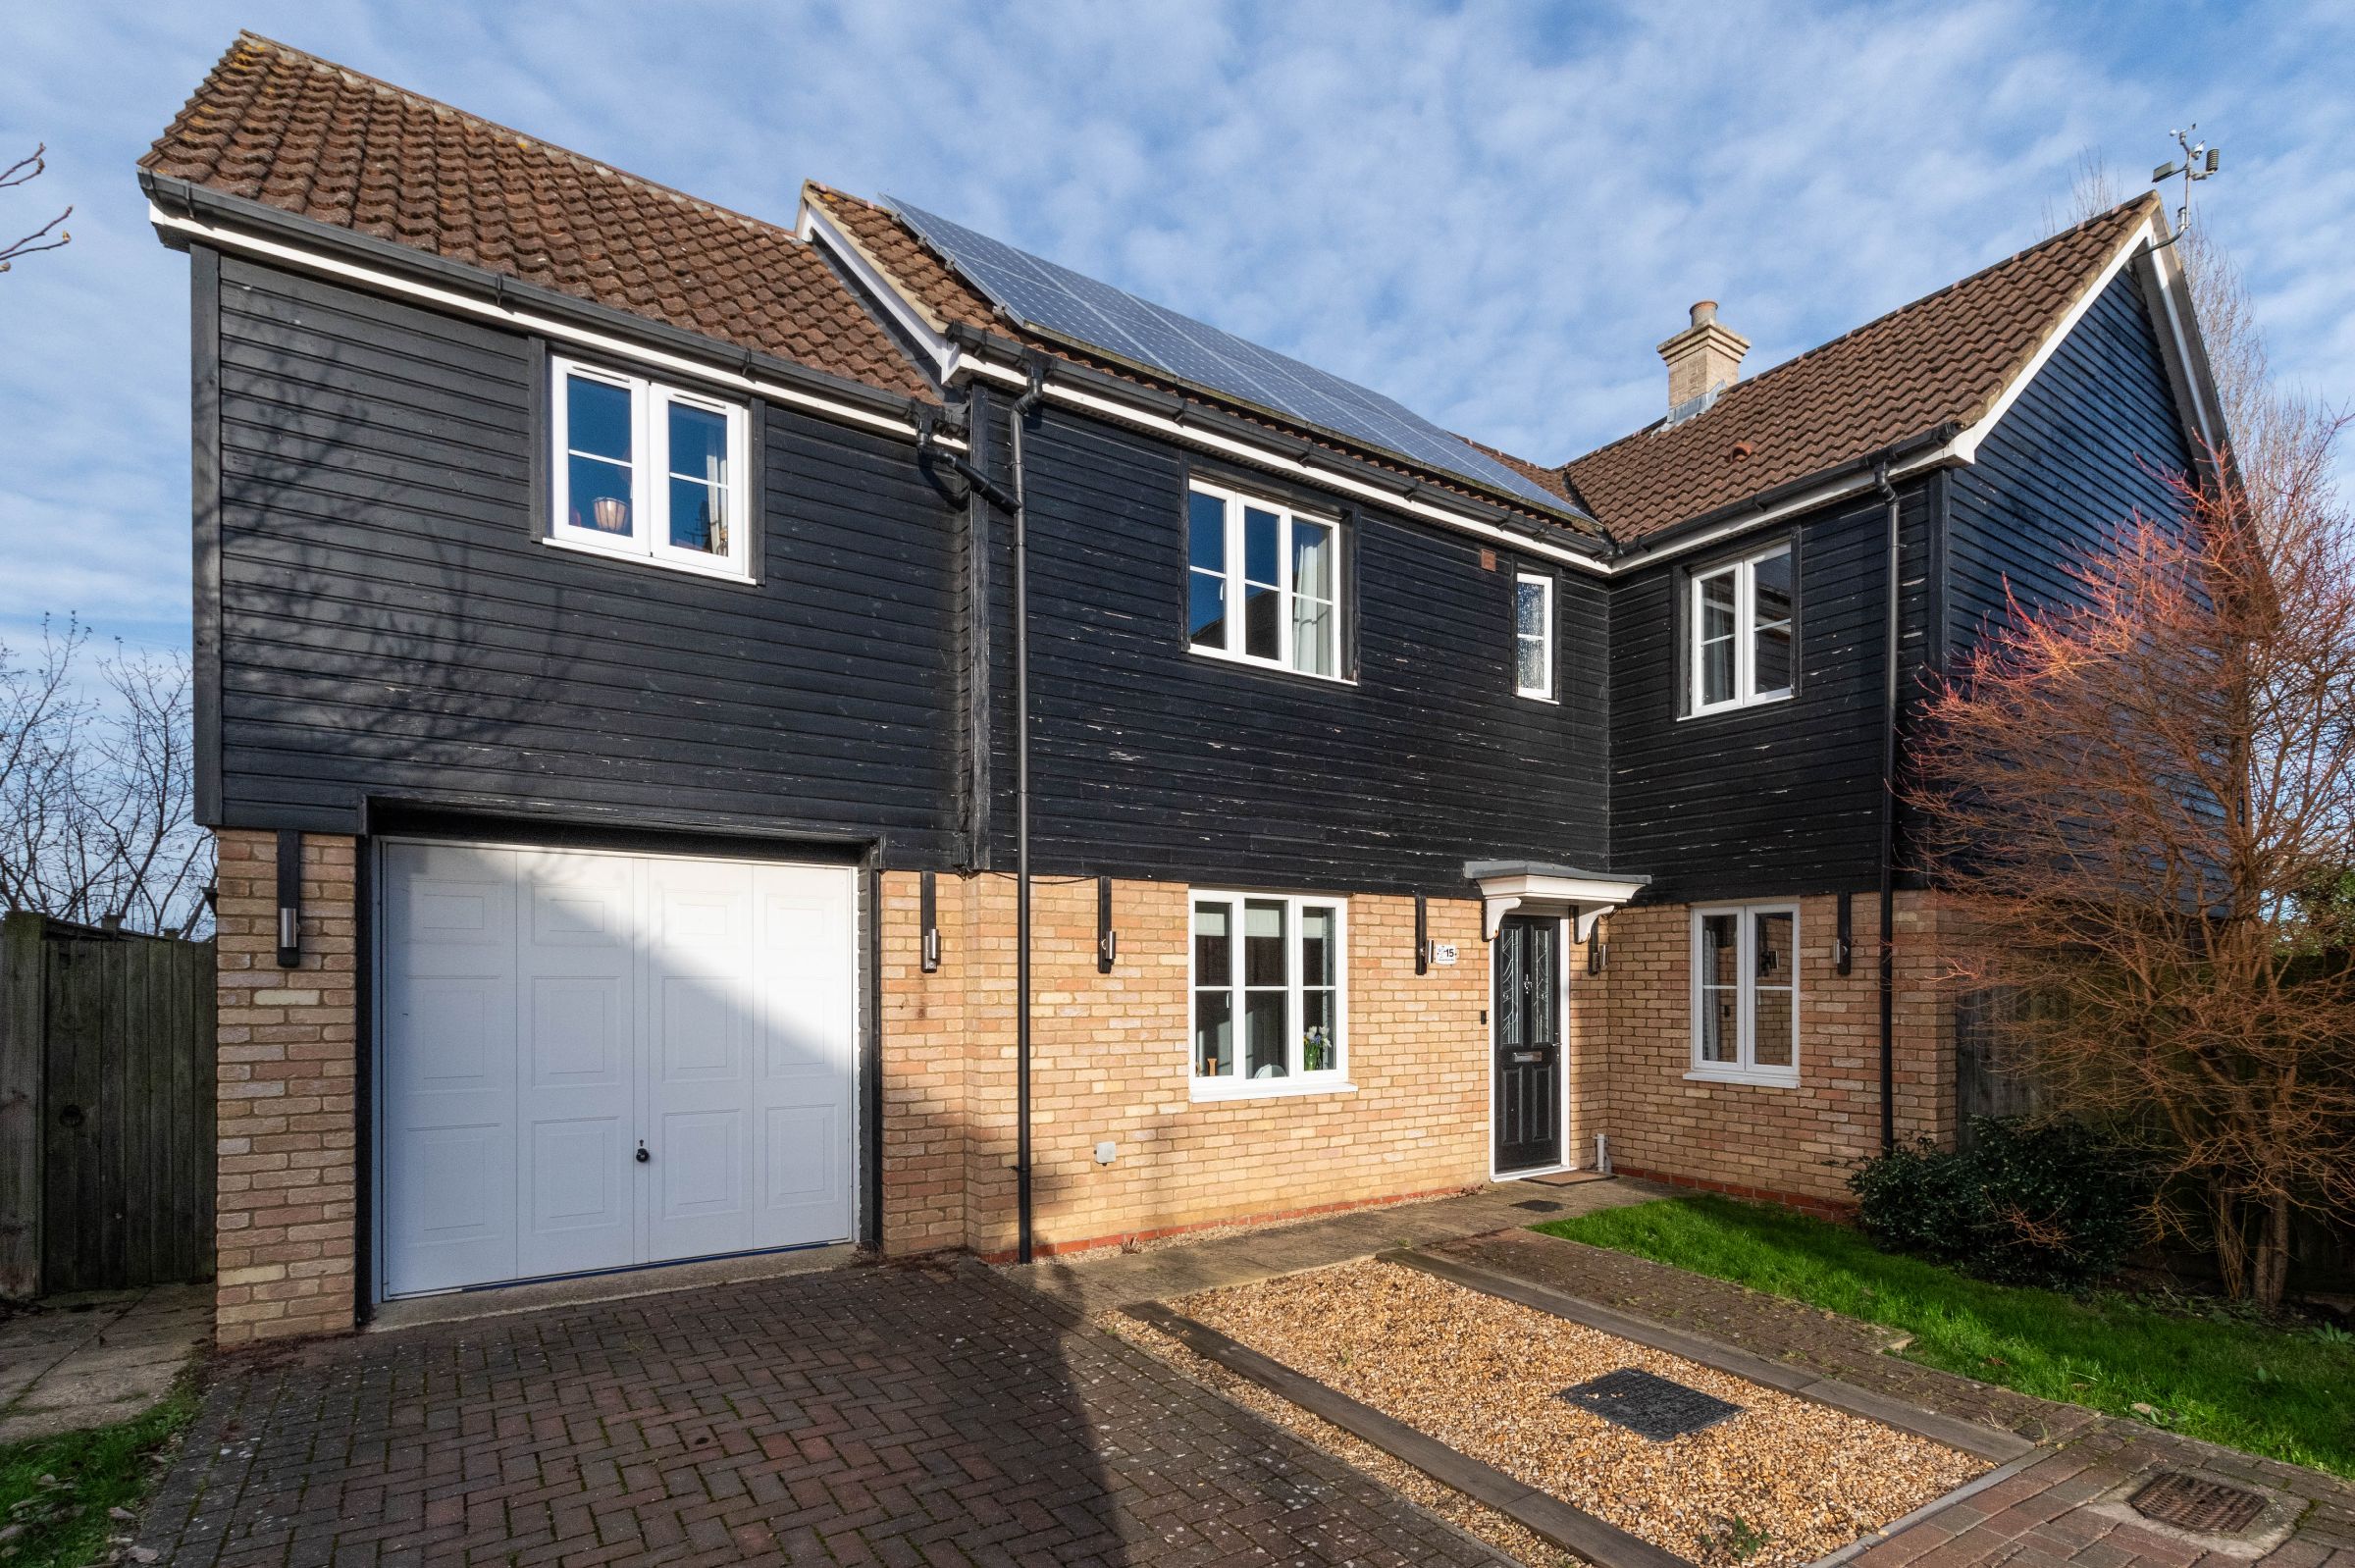 4 bed detached house for sale in George Alcock Way, Peterborough  - Property Image 1